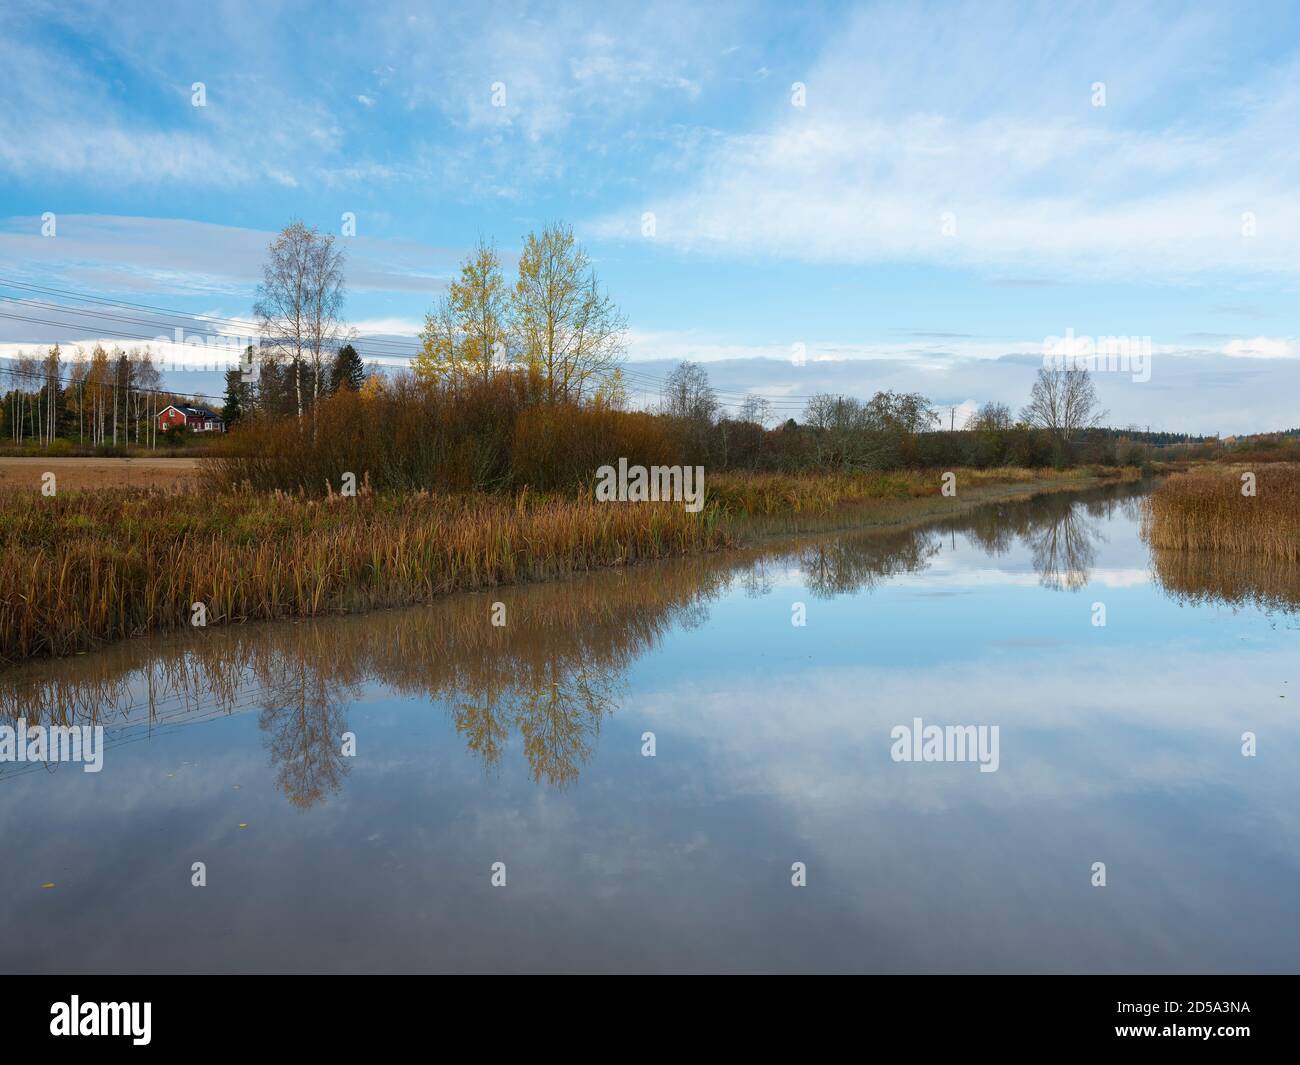 Sipoo/Finland - OCTOBER 12, 2020: A beautiful rural scene casting reflections on the calm river surface. Stock Photo